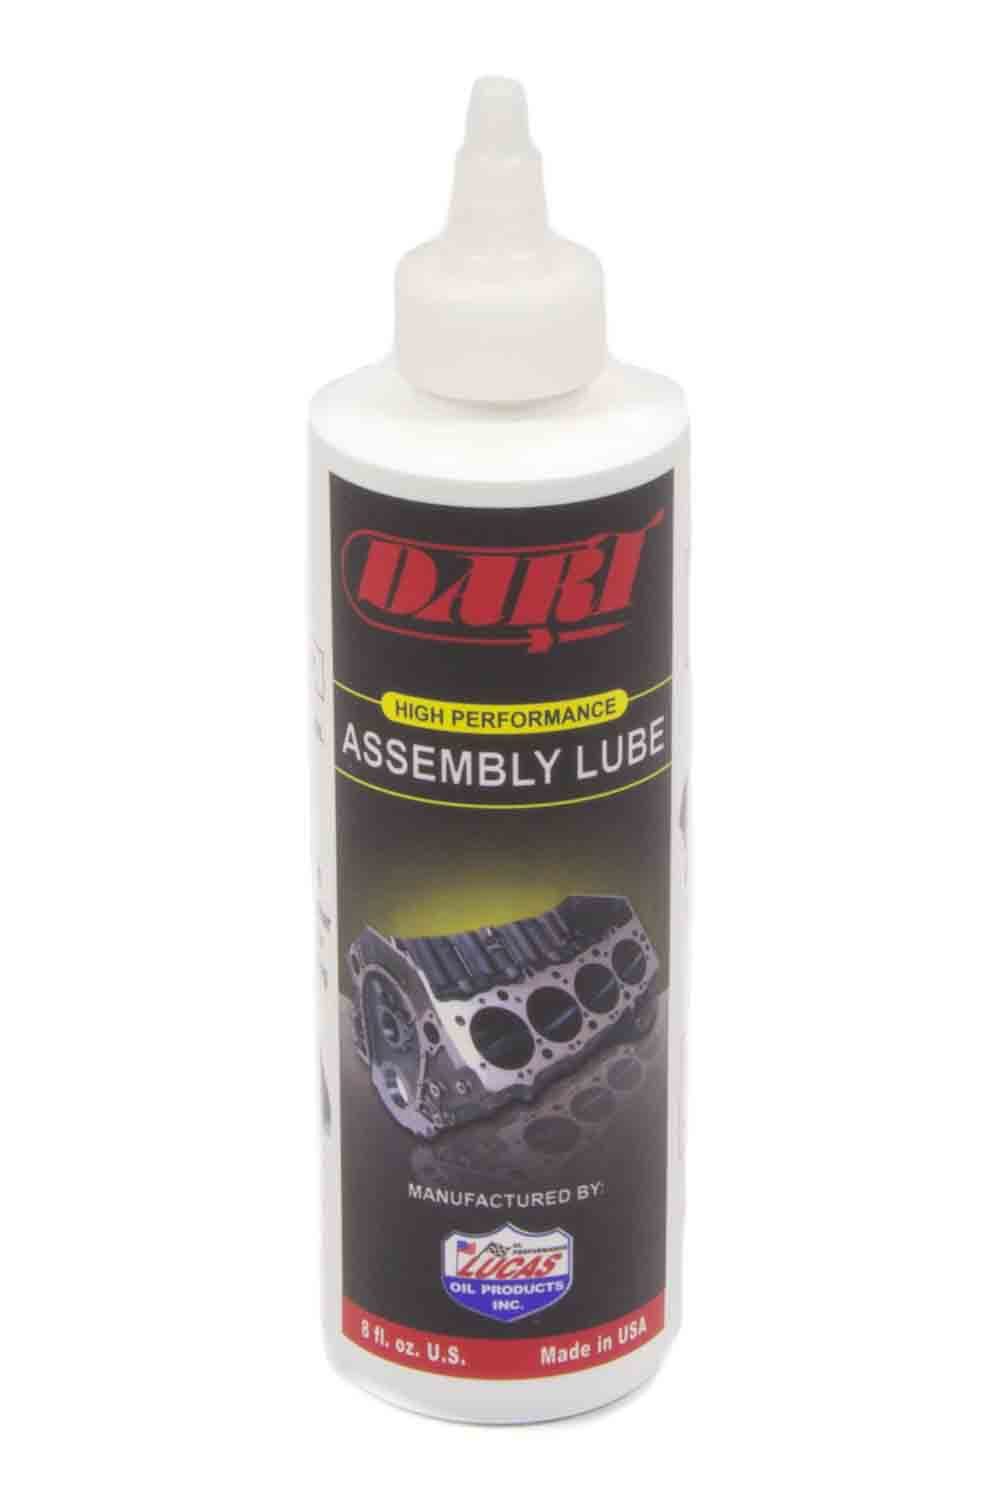 Dart 70000009 - High Perf. Assembly Lube - 8oz.